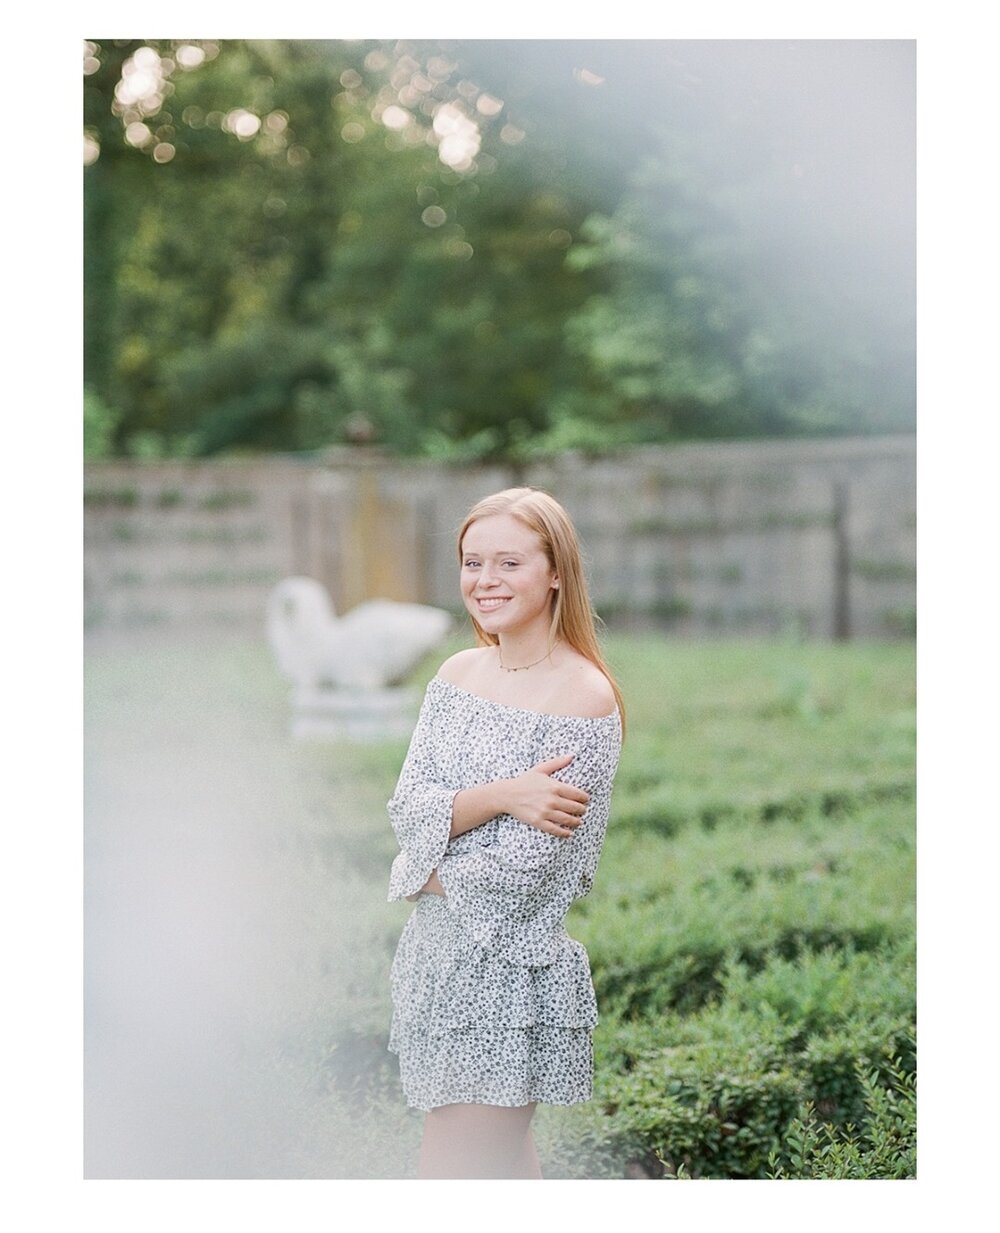 Lilly  Unity High School  Class of 2021⁠
⁠
I have known @lillystyan since she was a baby - her mom and I were college roommates and have kept in touch throughout the years.⁠
⁠
When I heard that Lilly specifically requested me to take her senior pictures I was so touched!⁠
⁠
She's a sweet girl withh an smile that never stops!⁠
⁠
Good luck with the rest of your senior year Lilly!